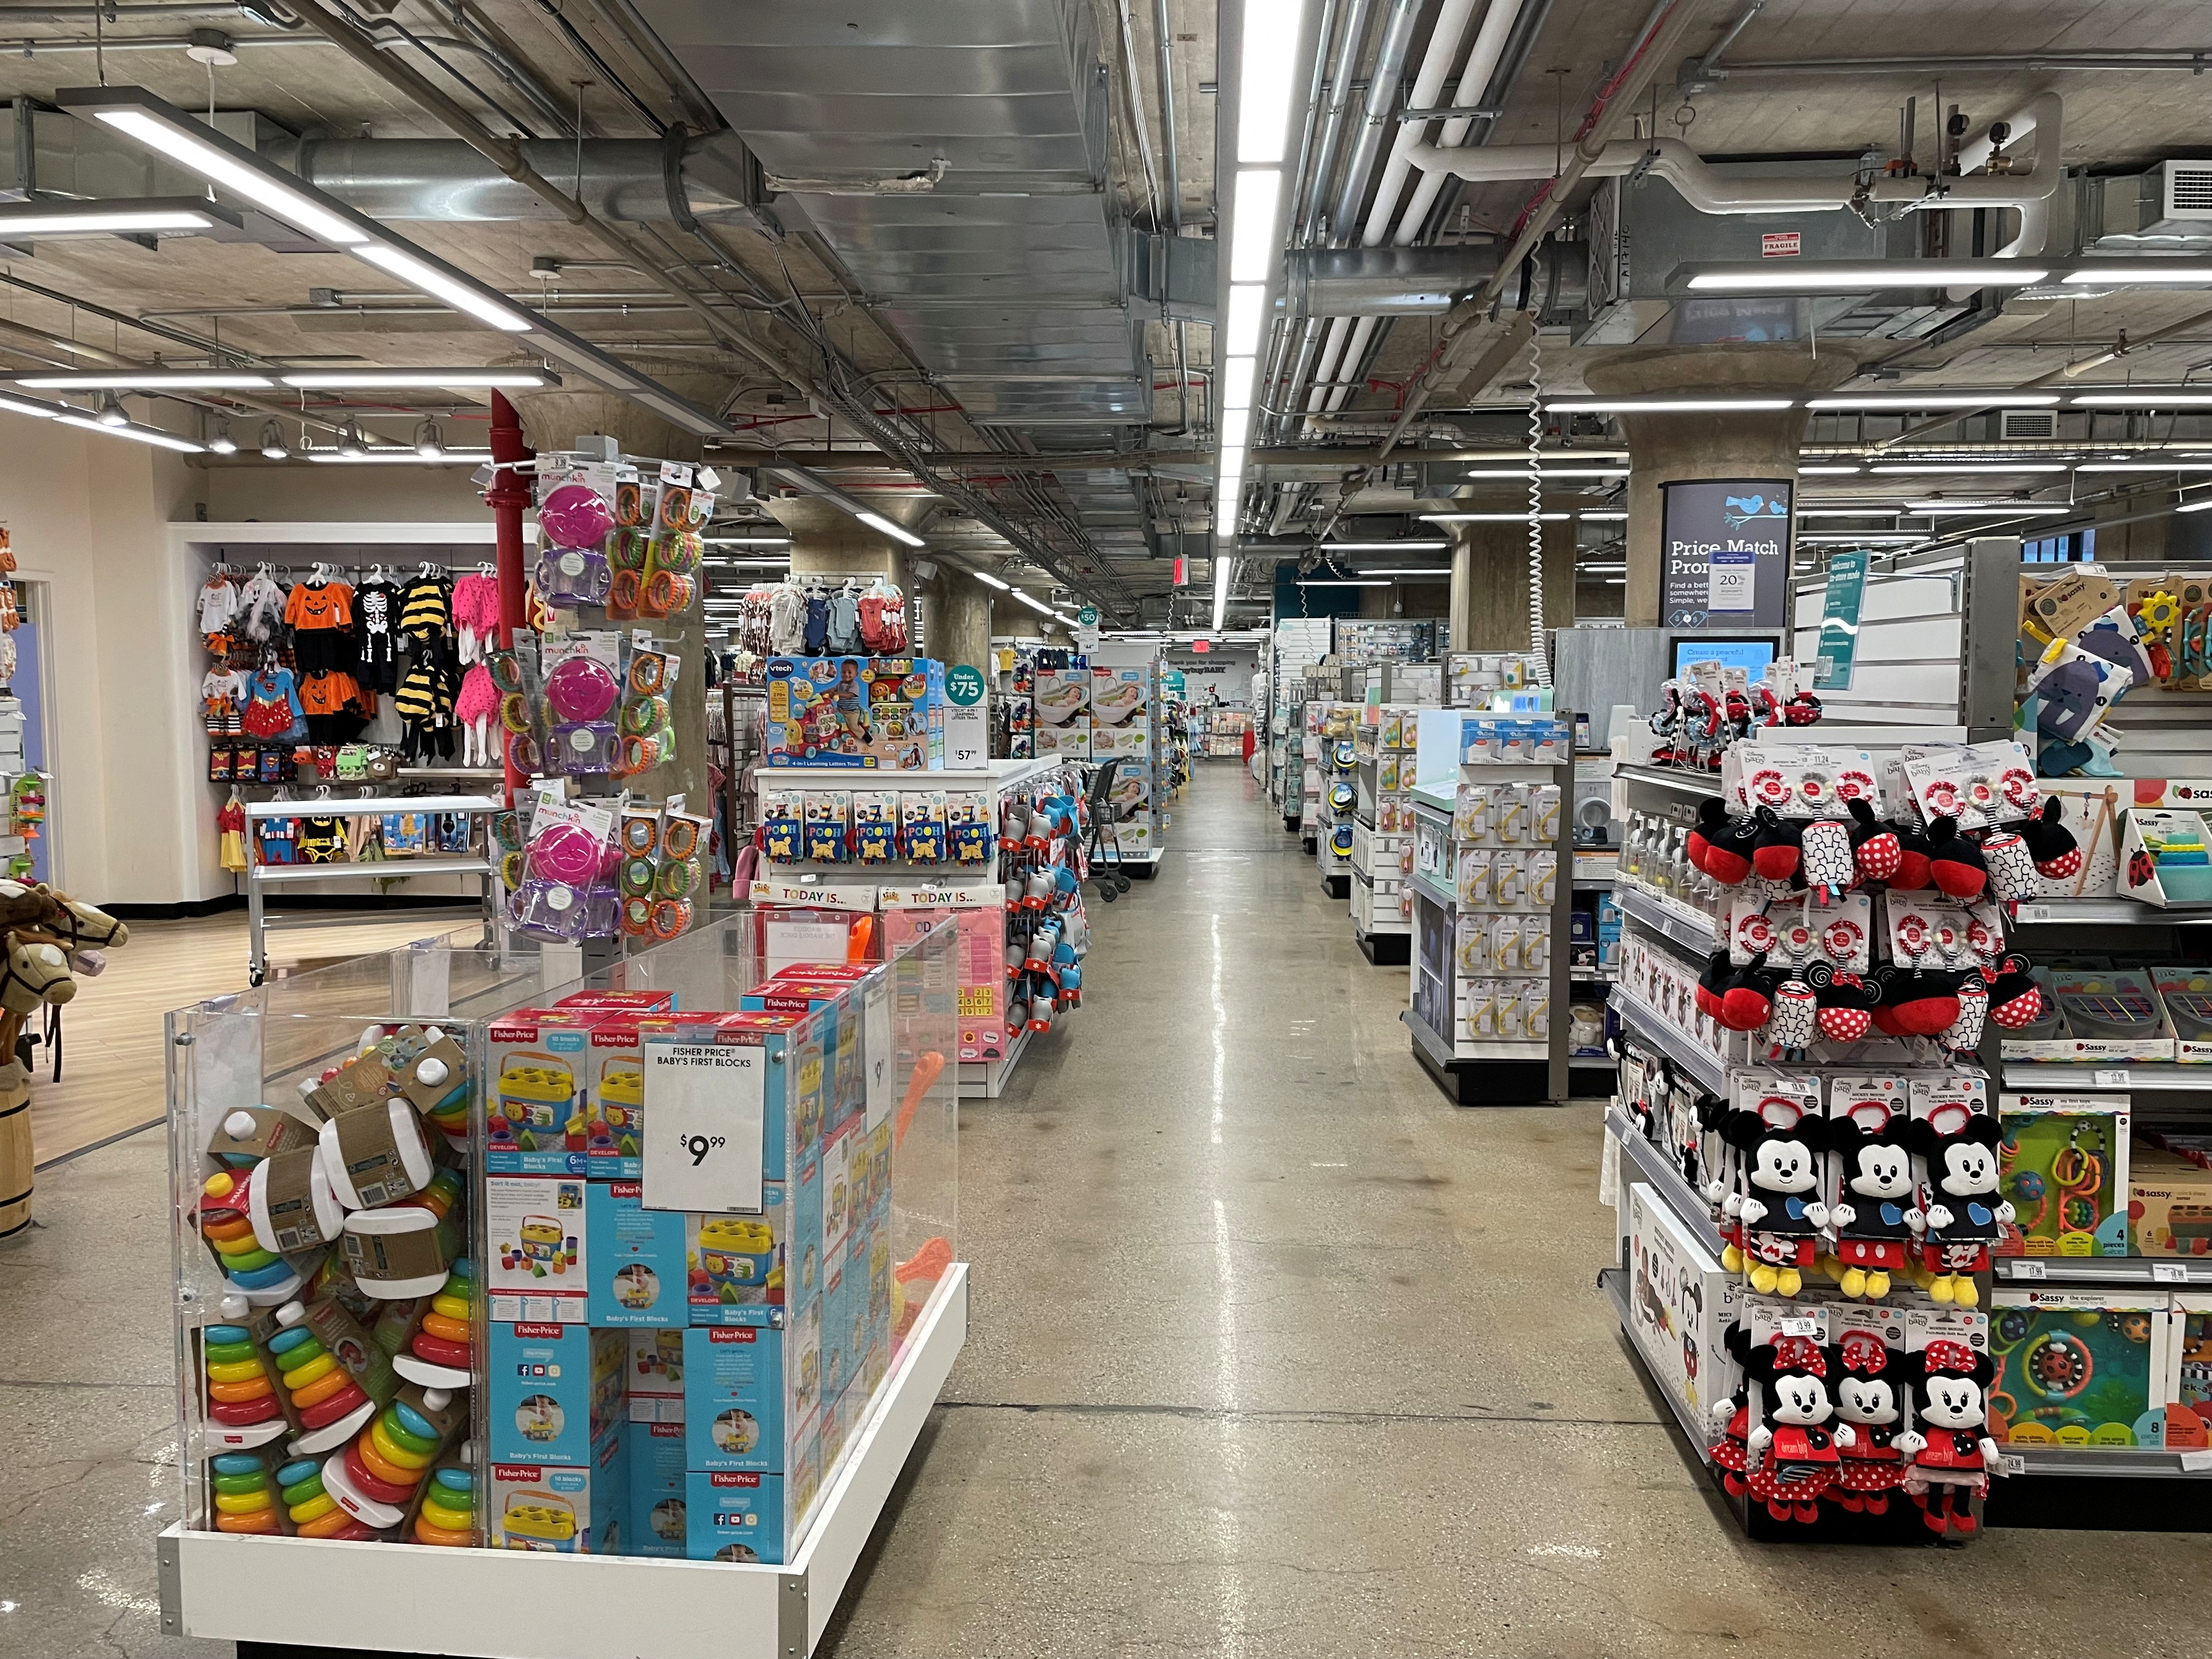 Inside view of a buybuy Baby store in Libertyview Industrial Plaza, Brooklyn, New York